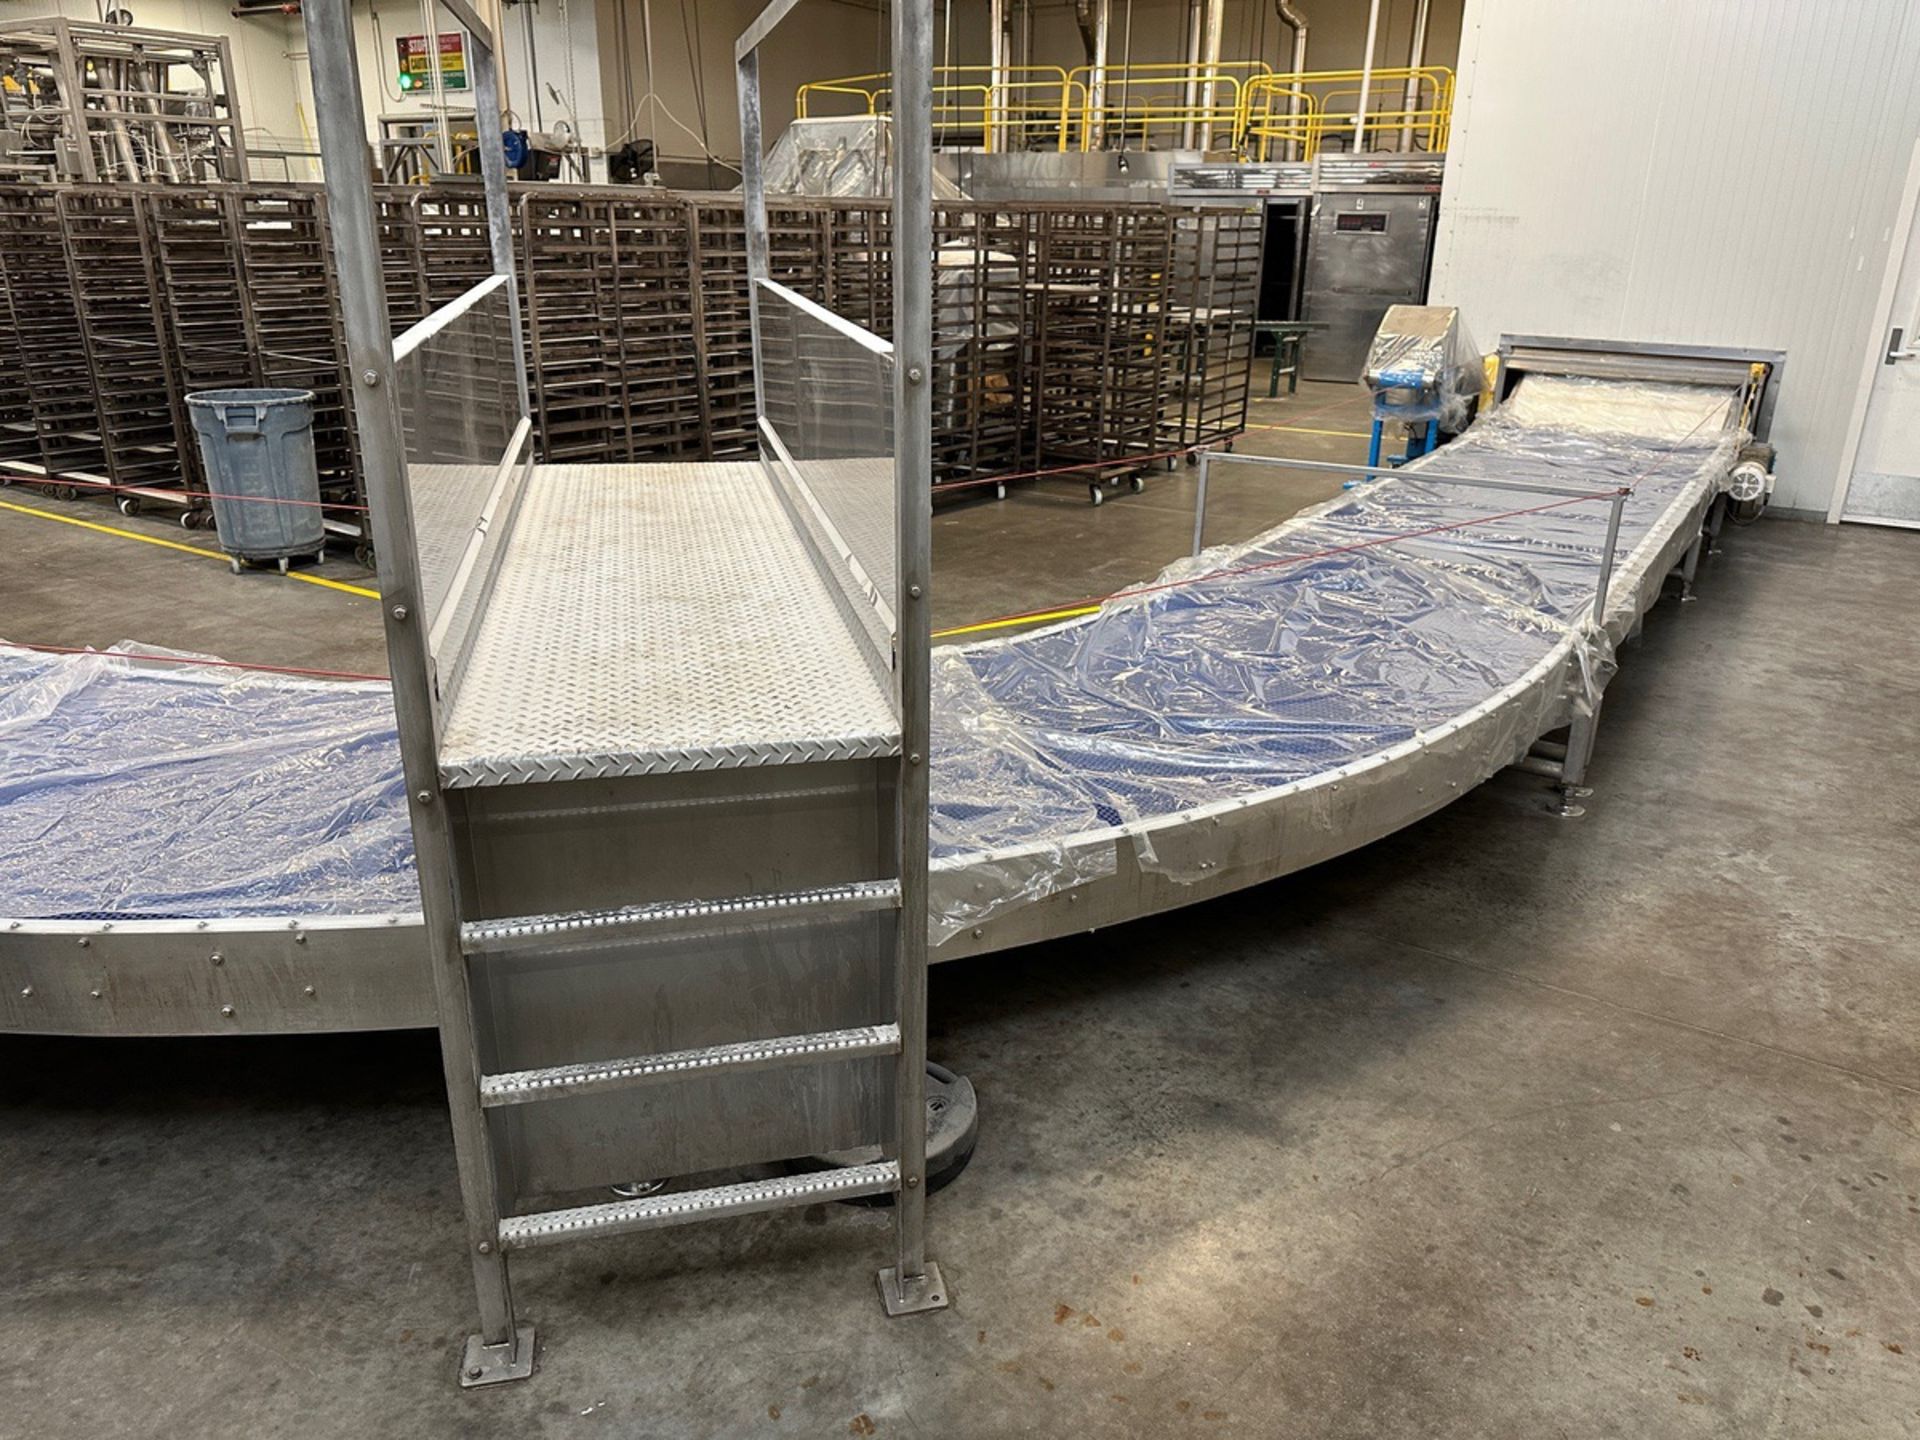 2019 AM Manufacturing Blue Belt Plastic Intralox Conveyor over Stainless Steel Fram | Rig Fee $1500 - Image 4 of 6